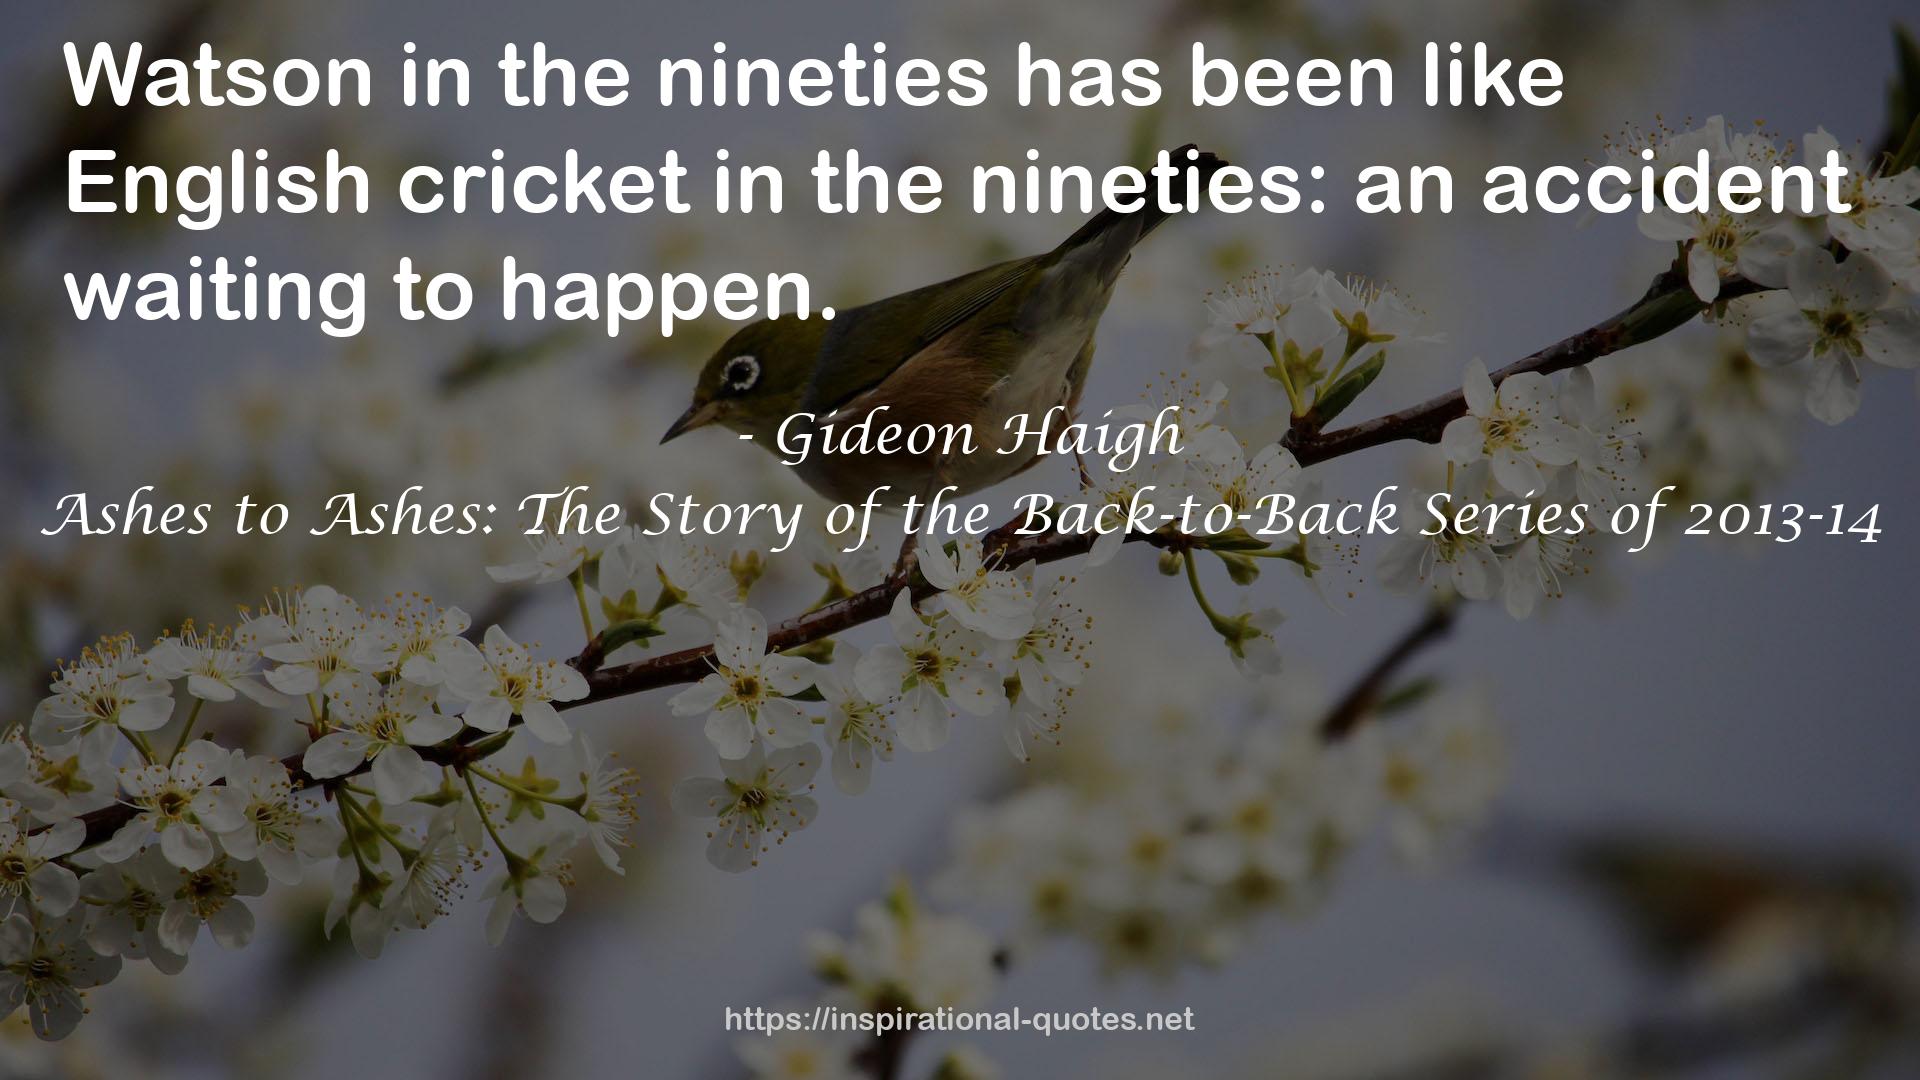 Ashes to Ashes: The Story of the Back-to-Back Series of 2013-14 QUOTES